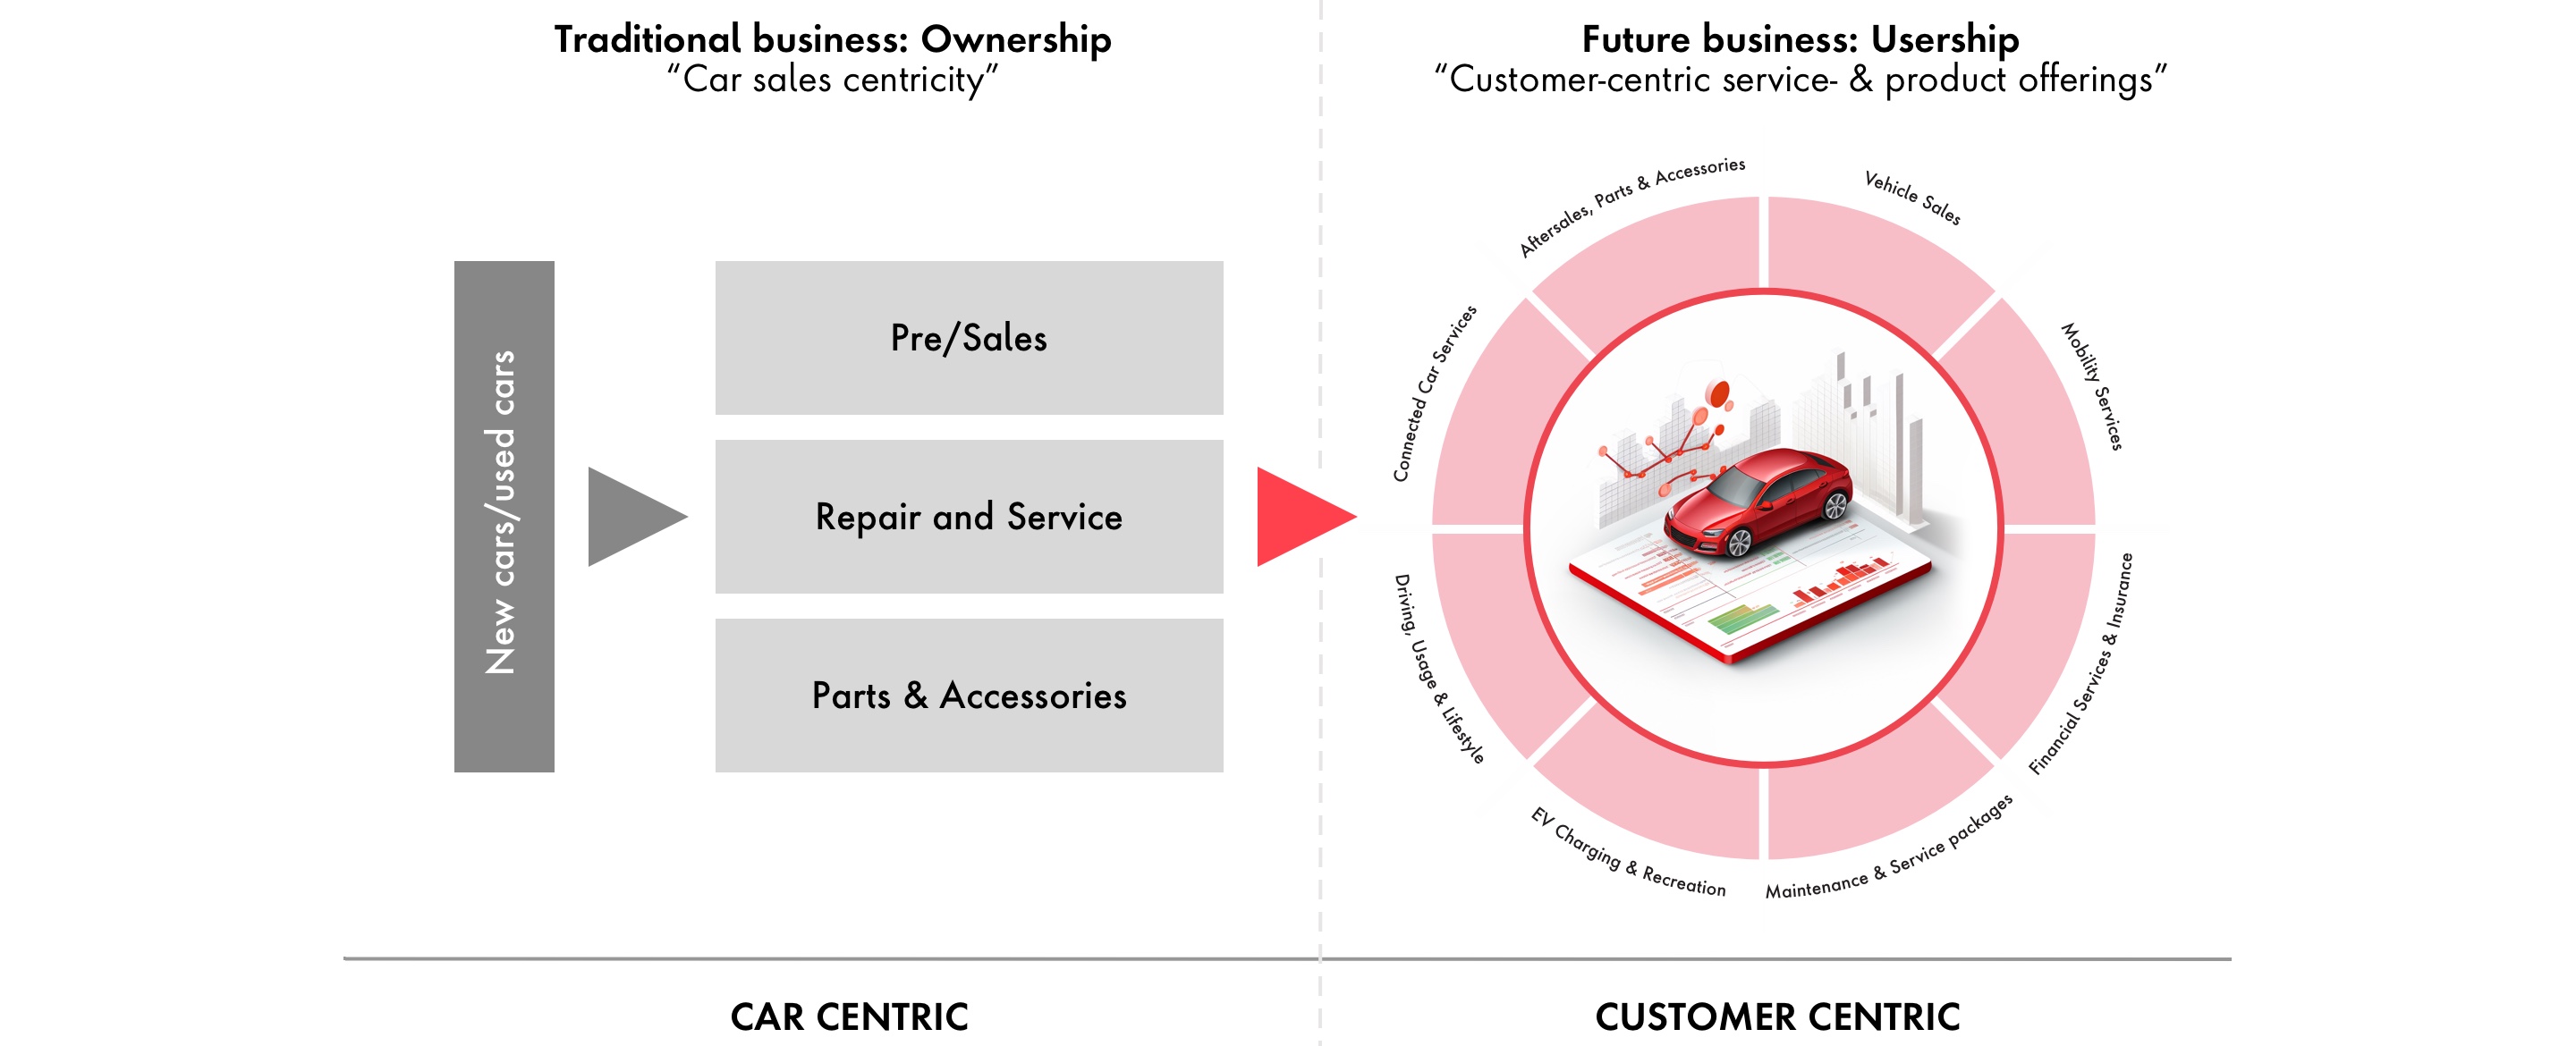 Graphic of traditional business ownership model compared to future business usership model that centers on customers.